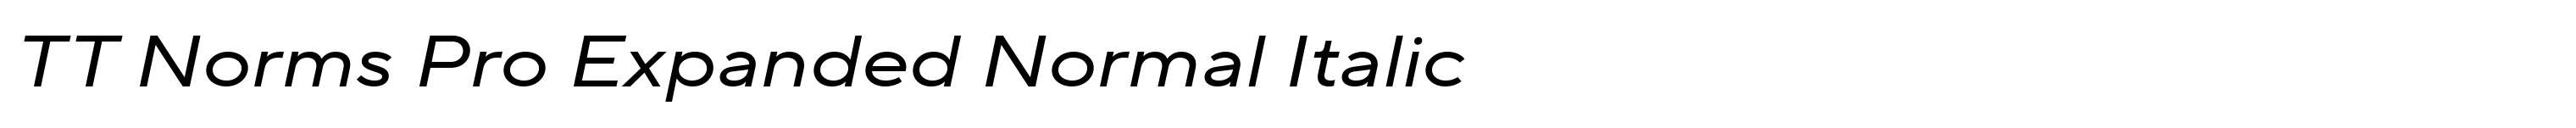 TT Norms Pro Expanded Normal Italic